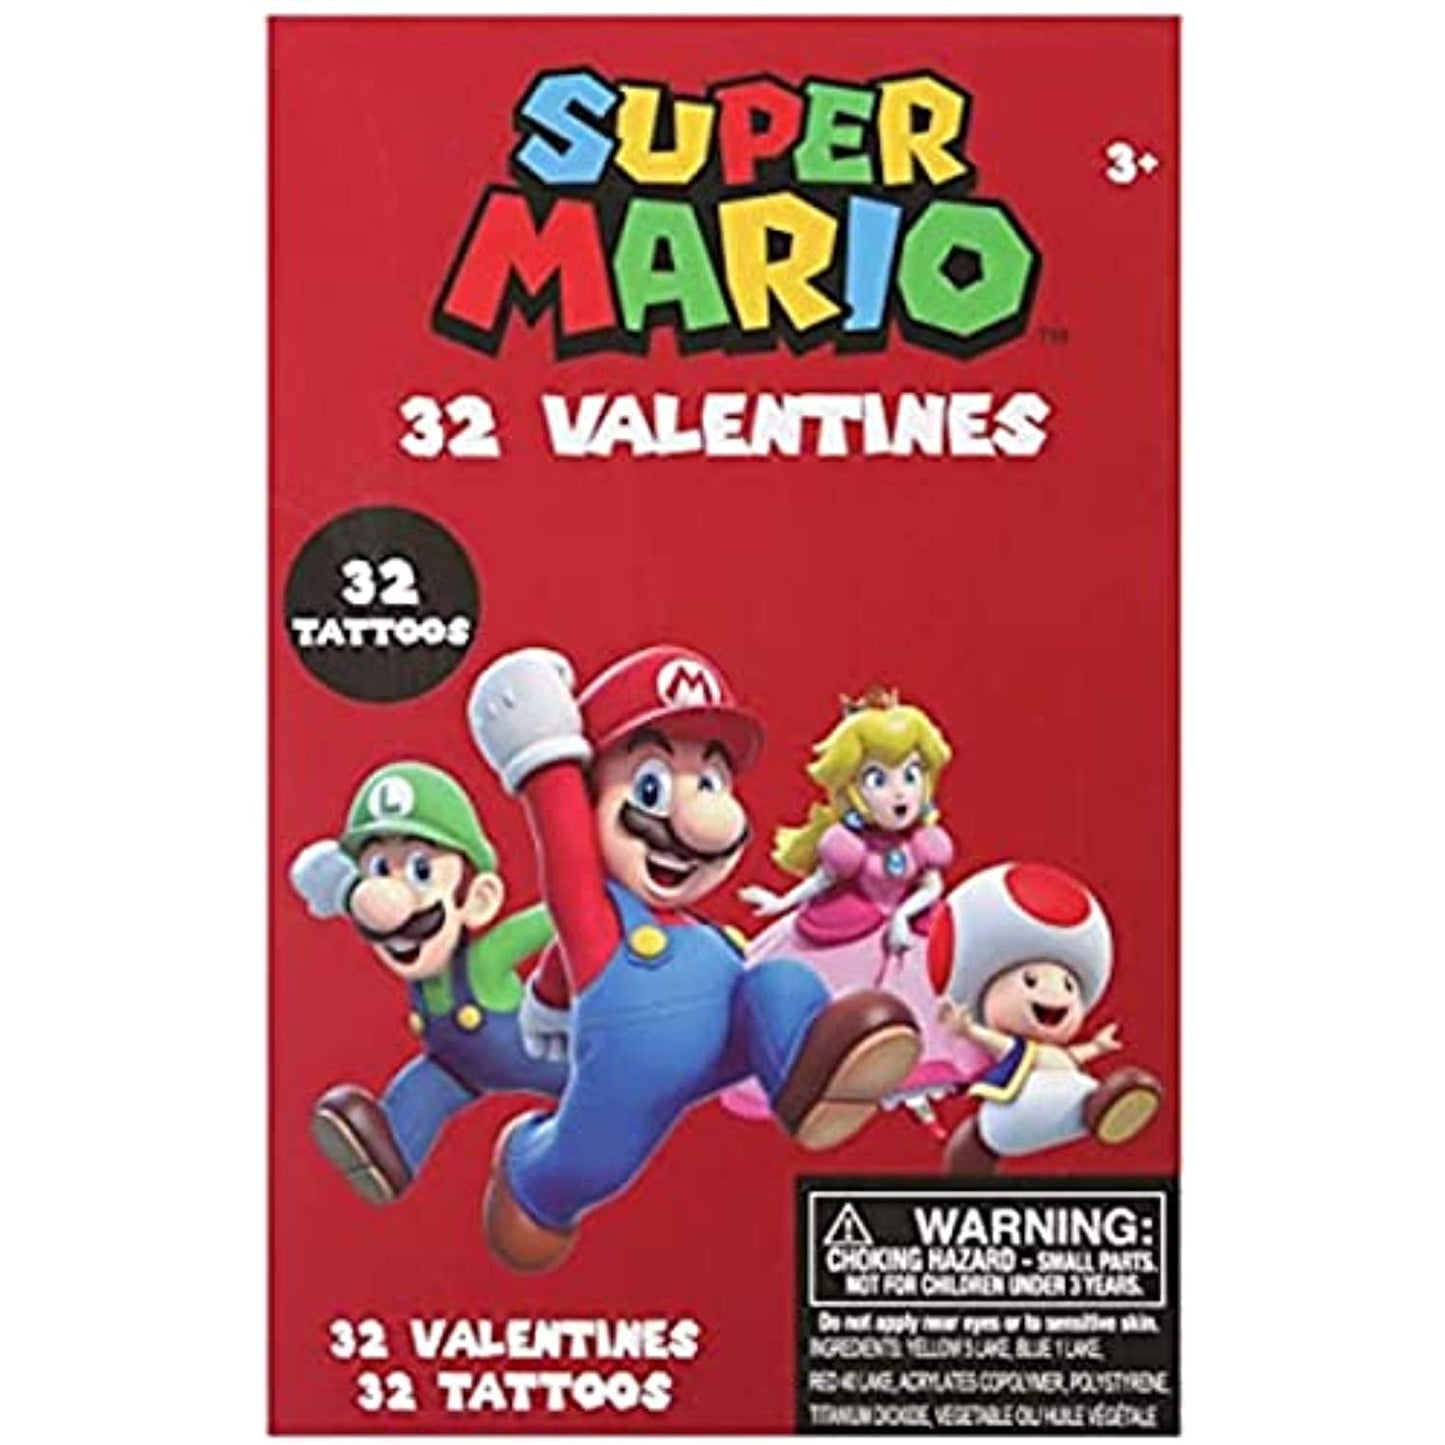 Super Mario 32 Valentines with Tattoos and Heart Seals Valentine's Day Classroom Exchange Cards